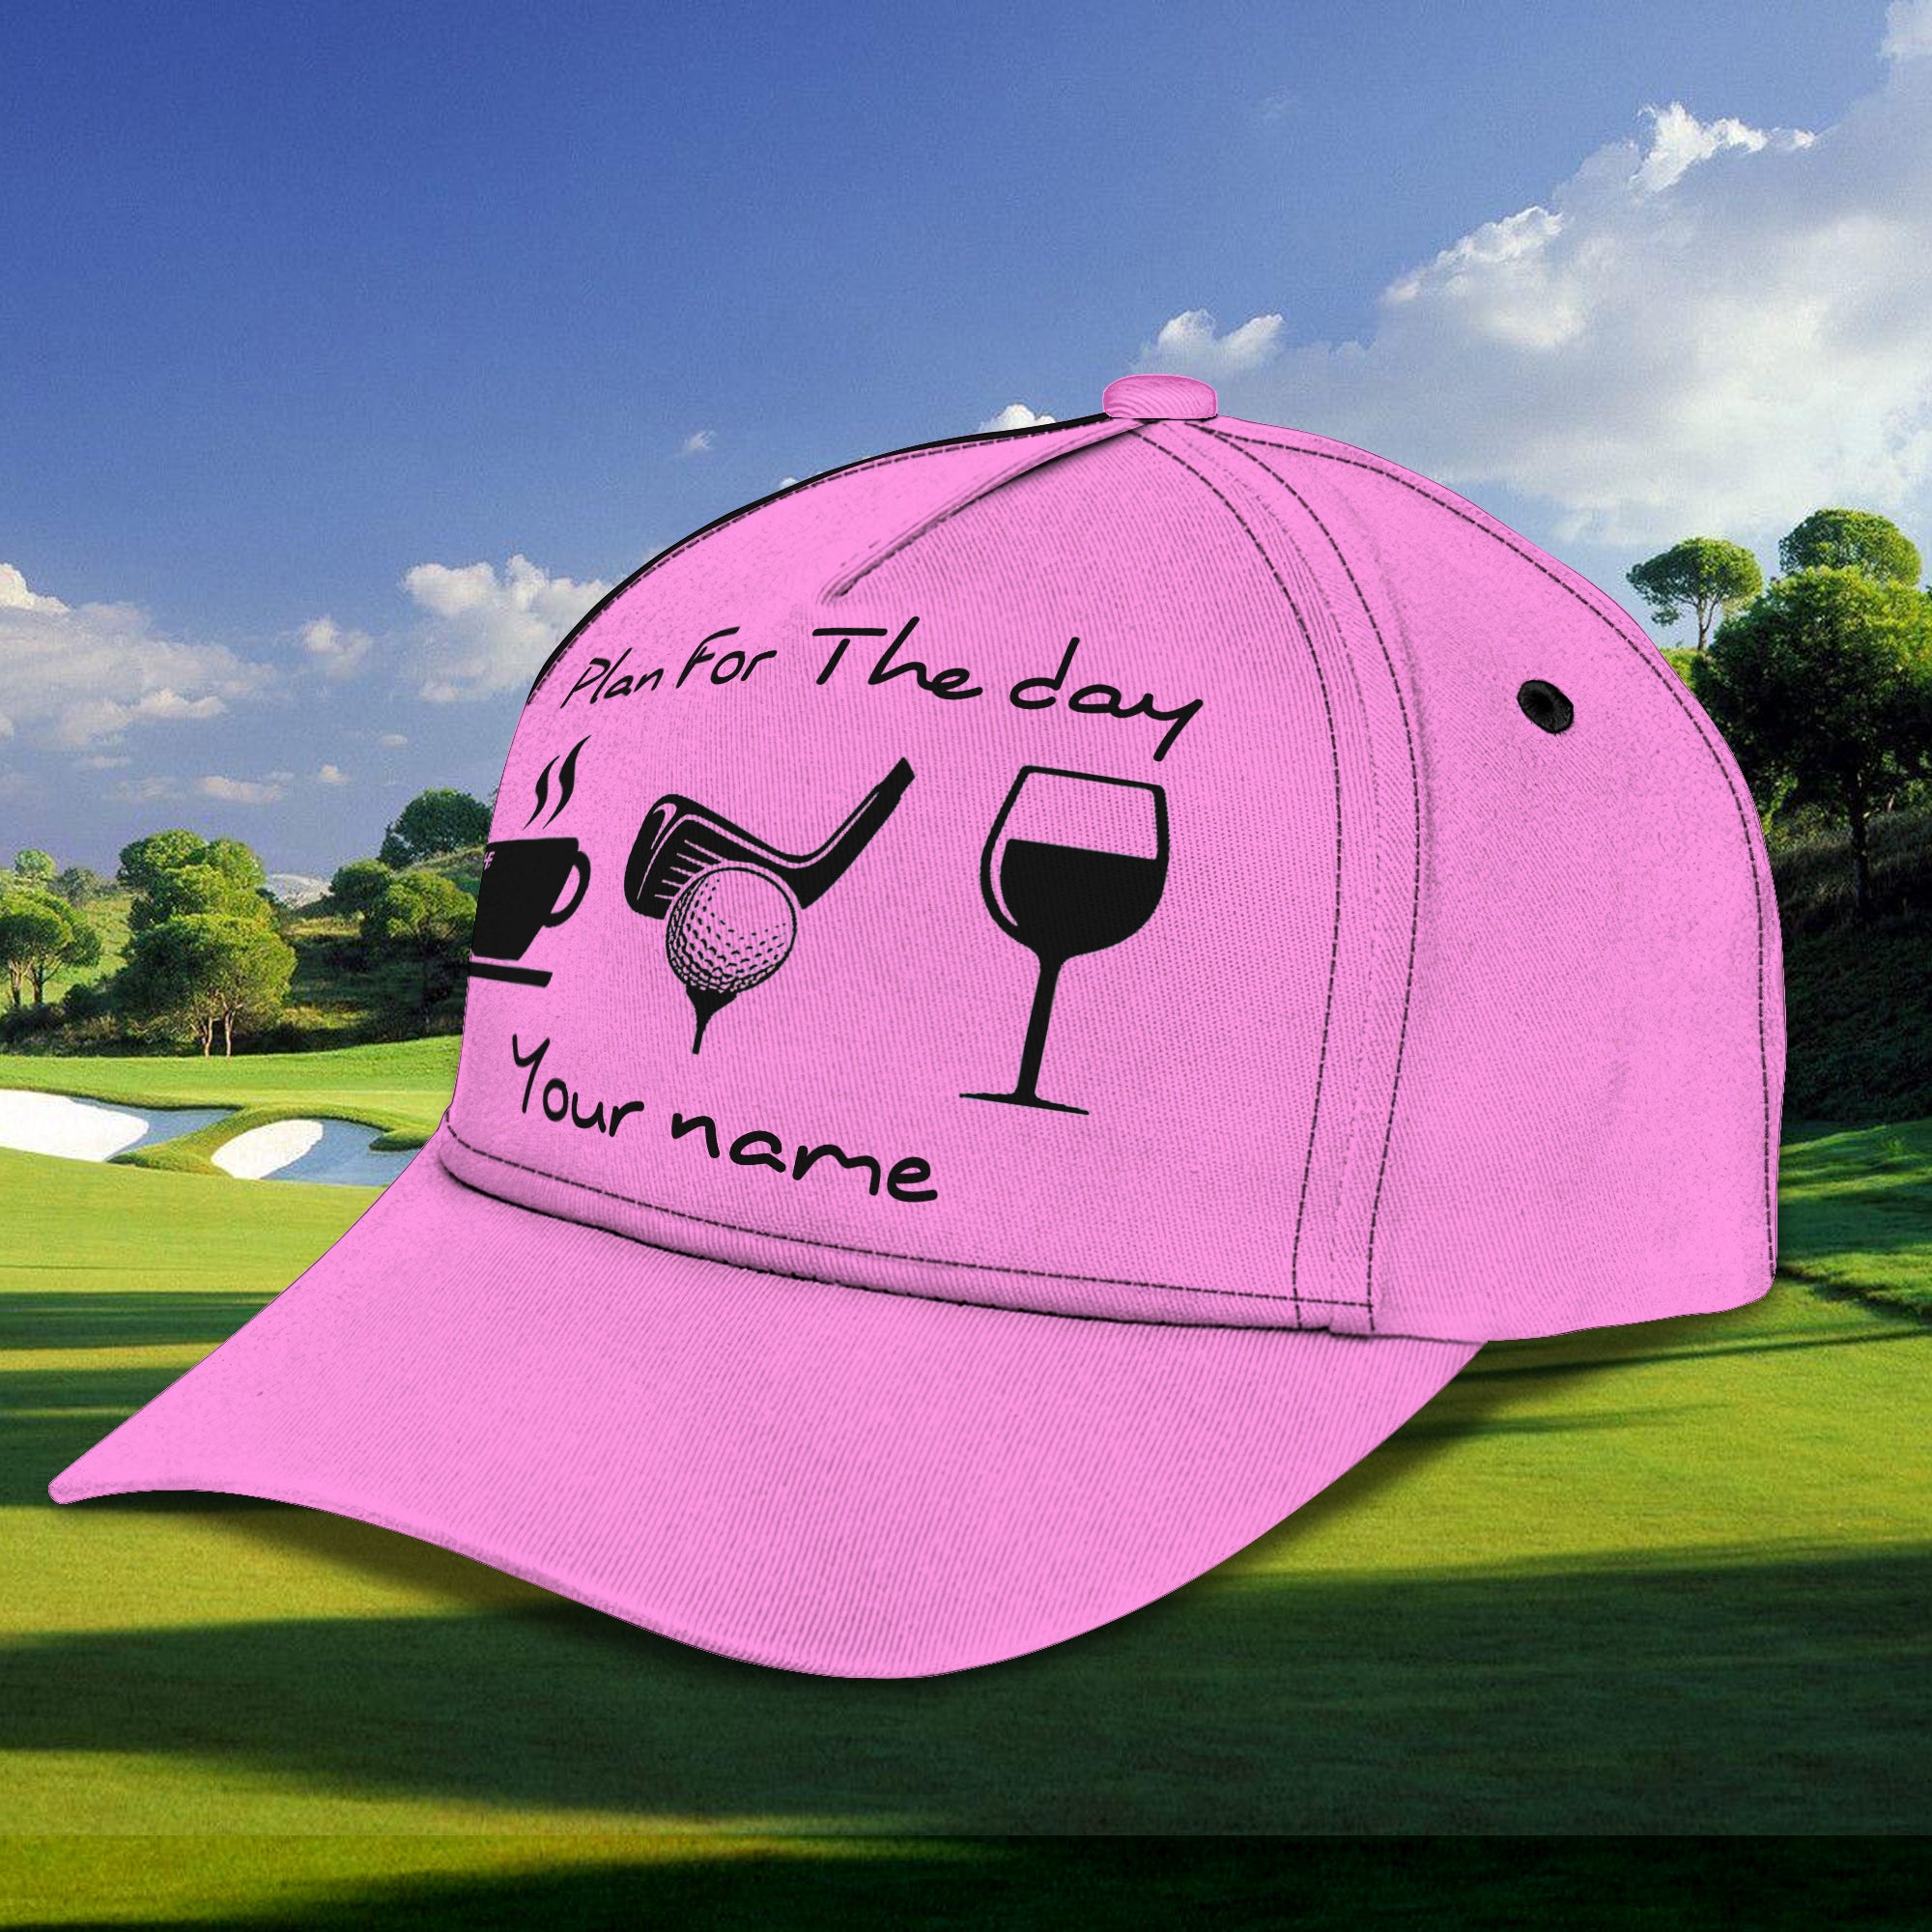 Plan For Golf The Day - Golf - Personalized Name Cap - Mitru